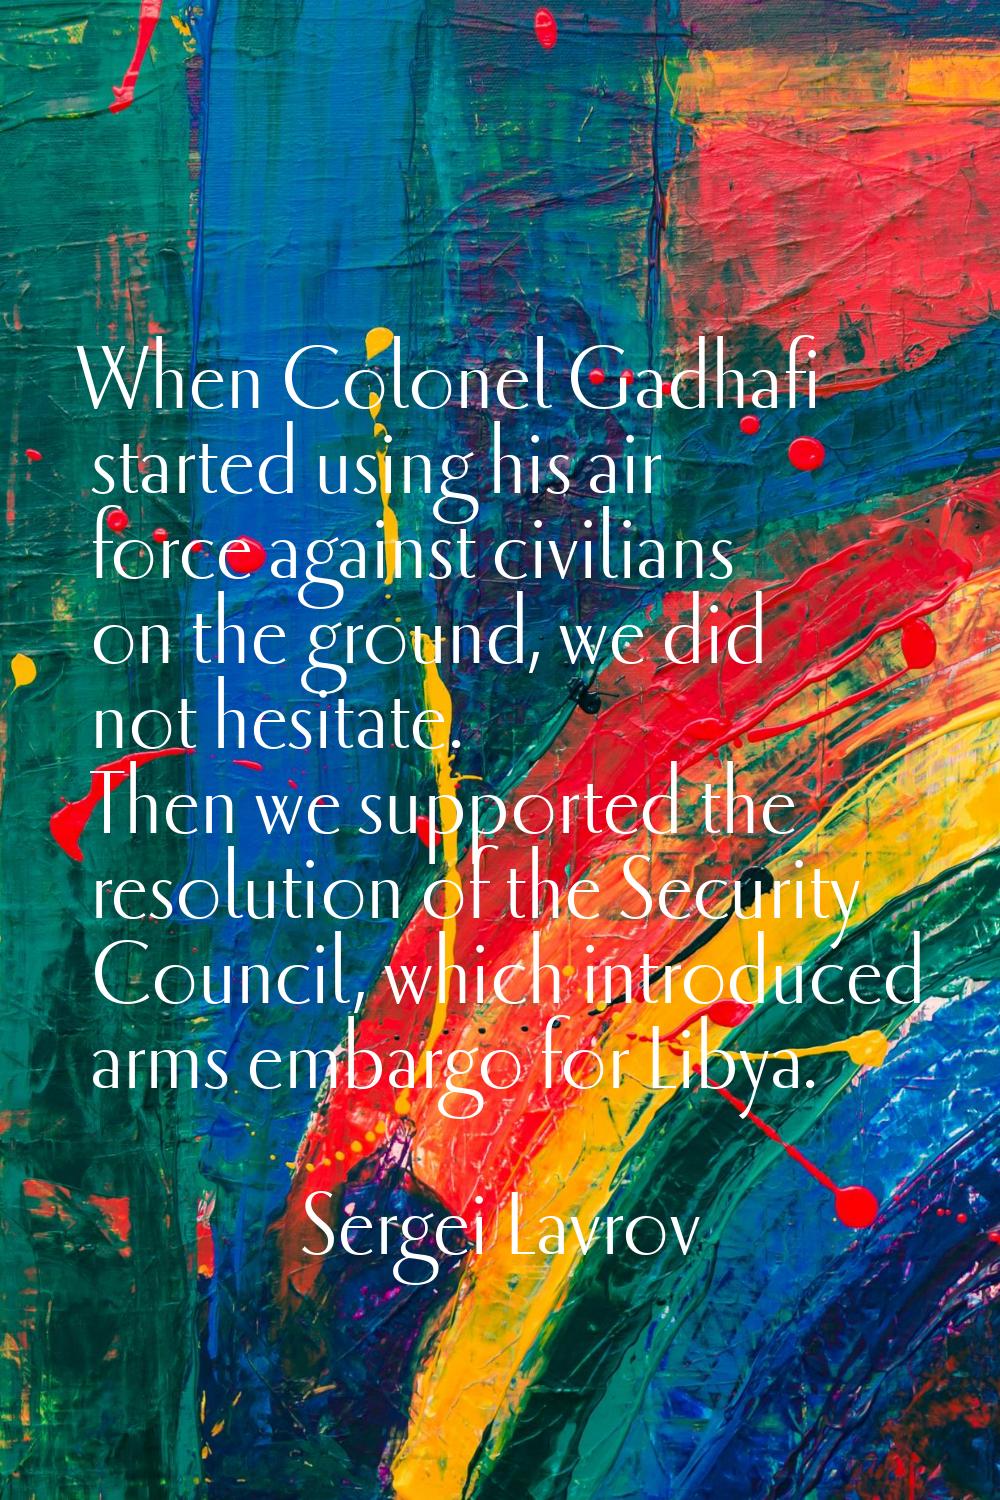 When Colonel Gadhafi started using his air force against civilians on the ground, we did not hesita